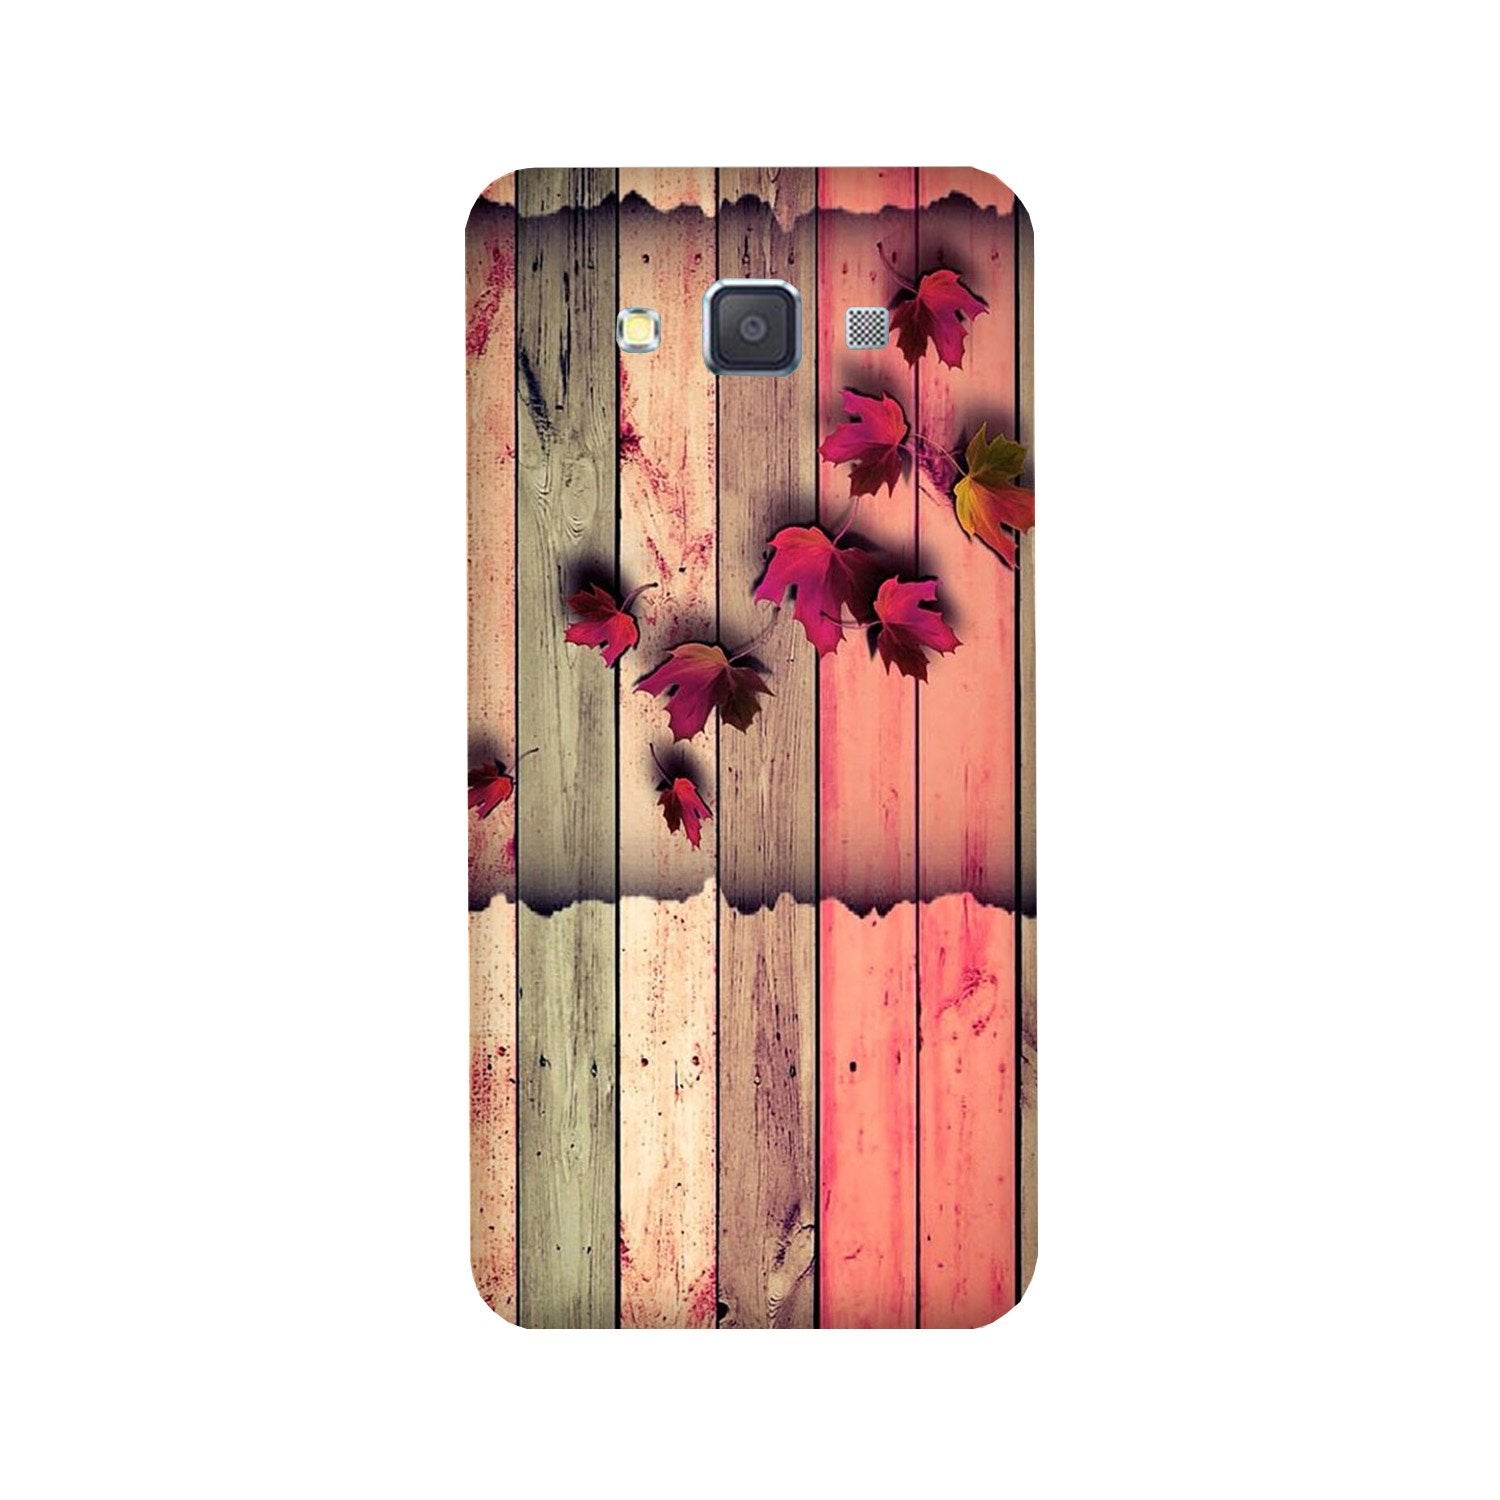 Wooden look2 Case for Galaxy A3 (2015)